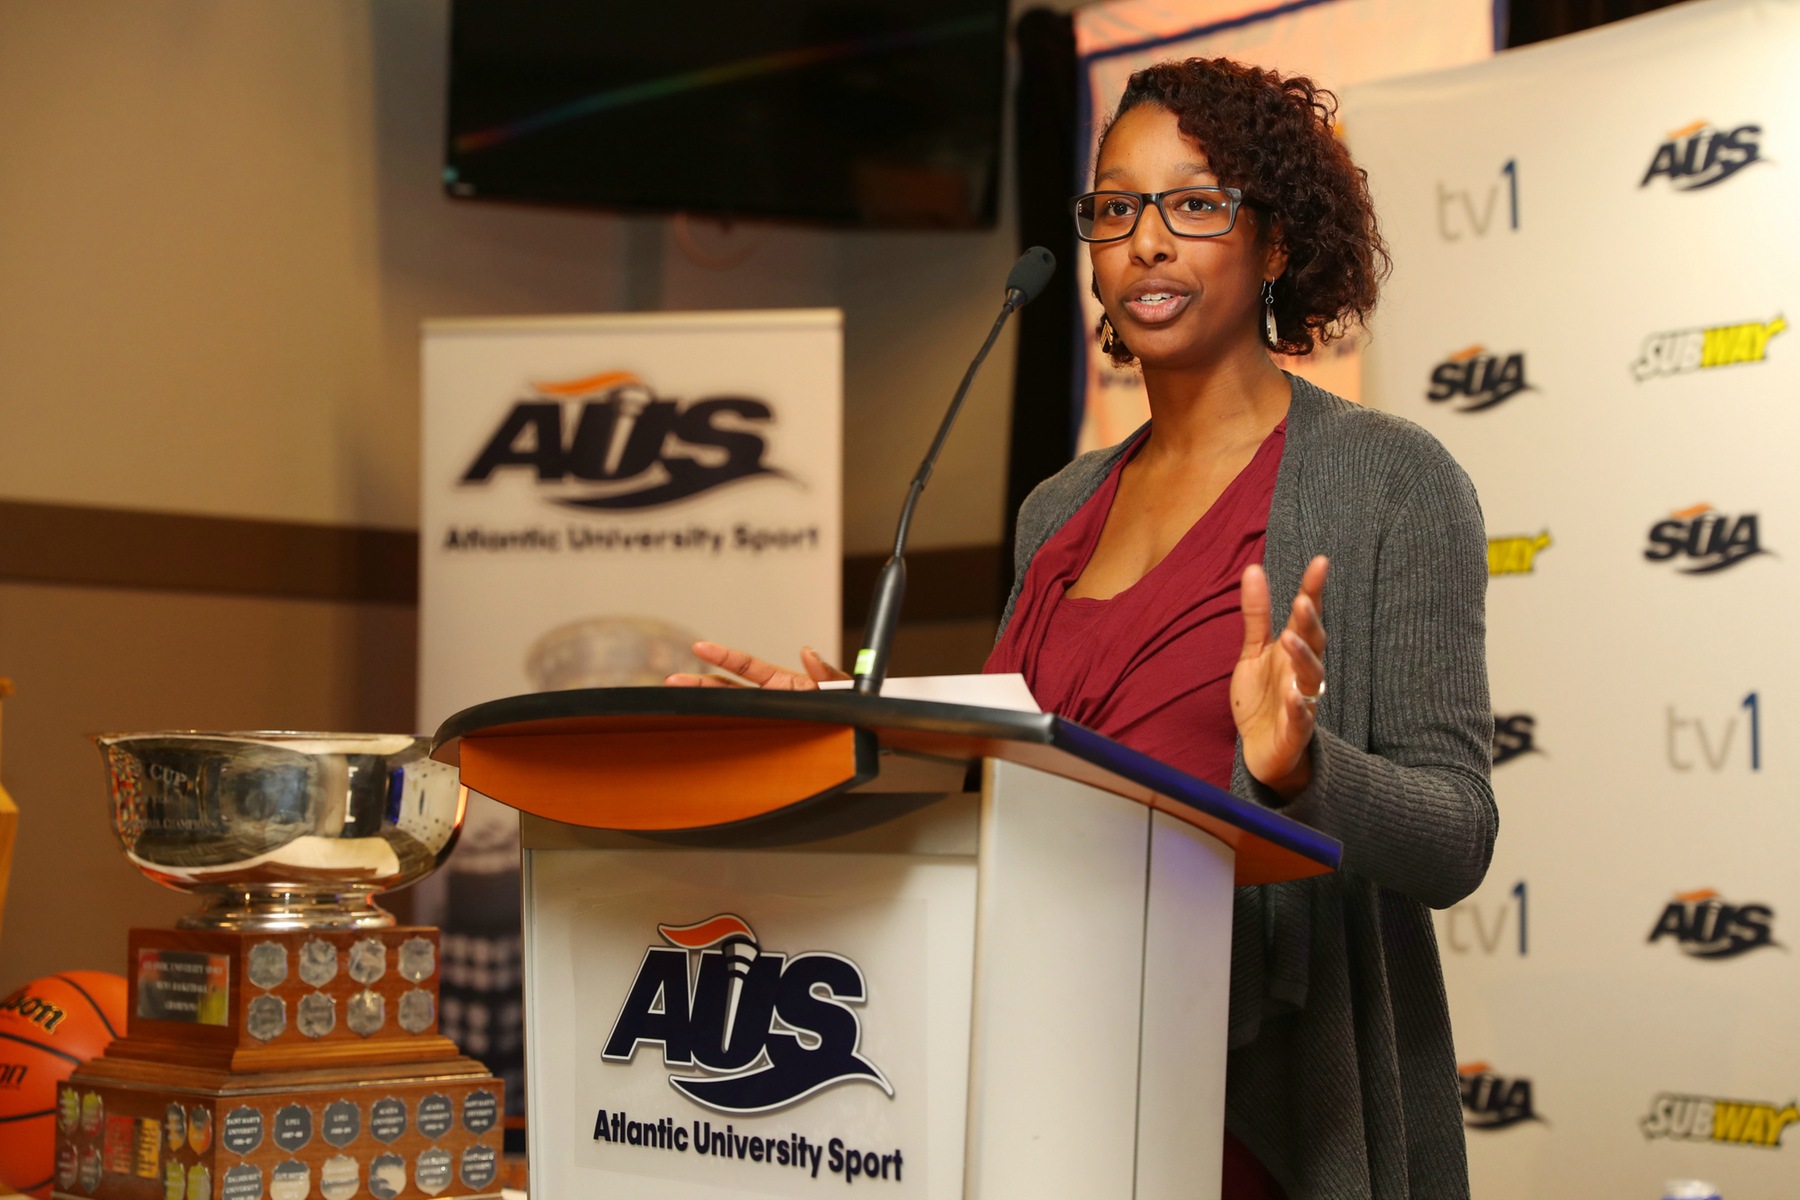 Justine Colley-Leger named honorary chair of 2017 Subway AUS Basketball Championships